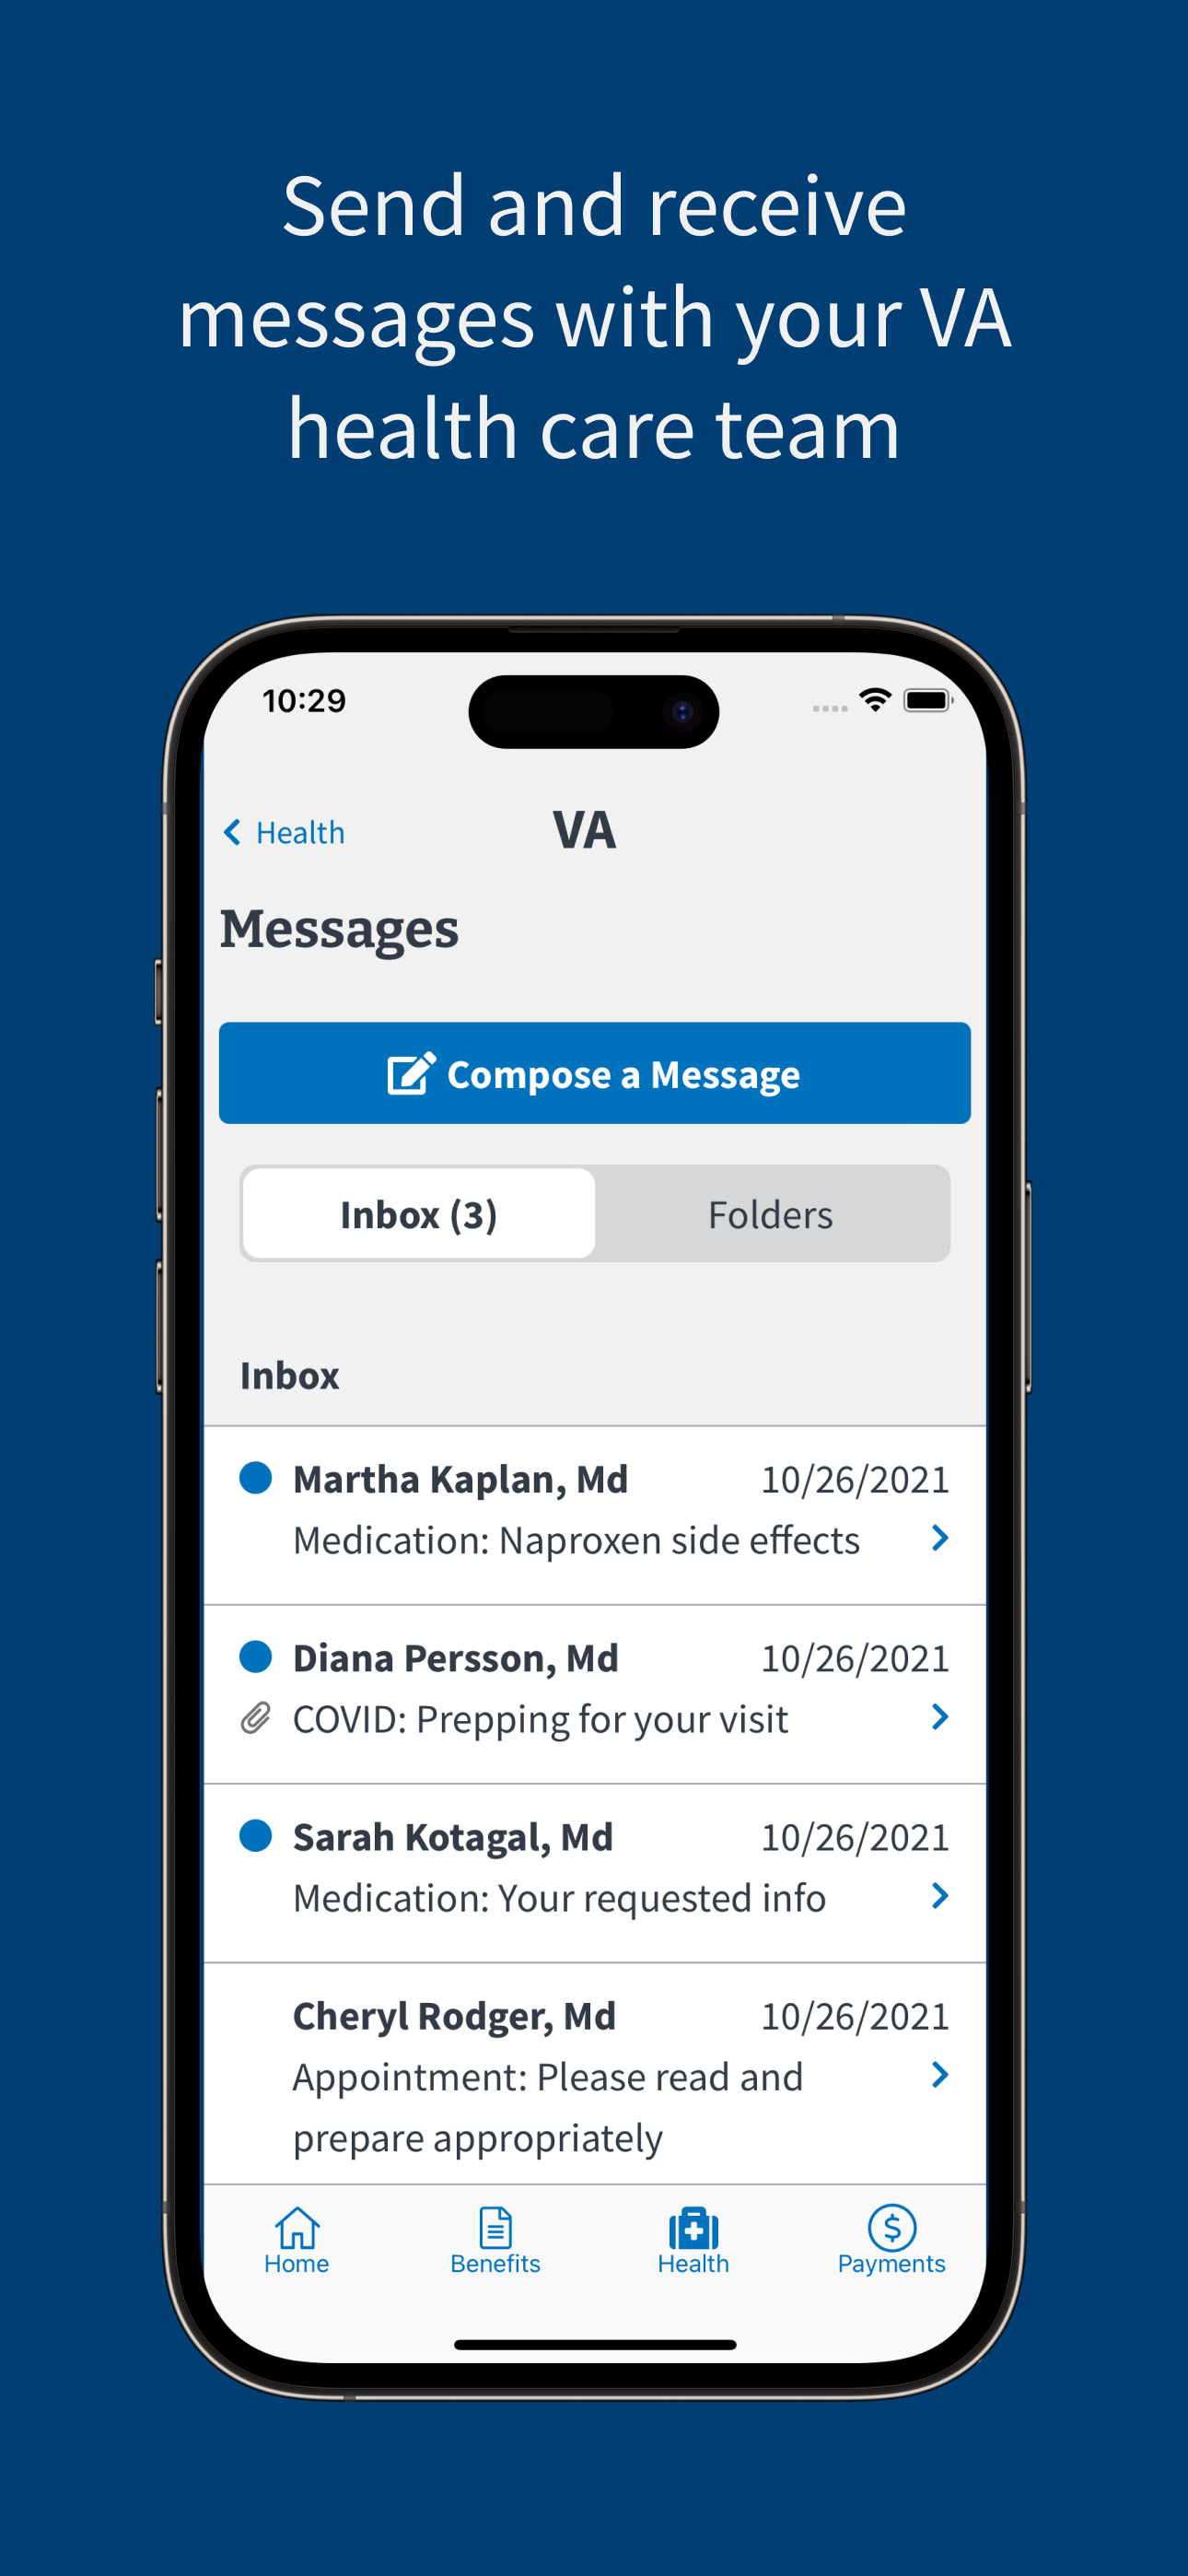 Send and receive messages with your VA health care team